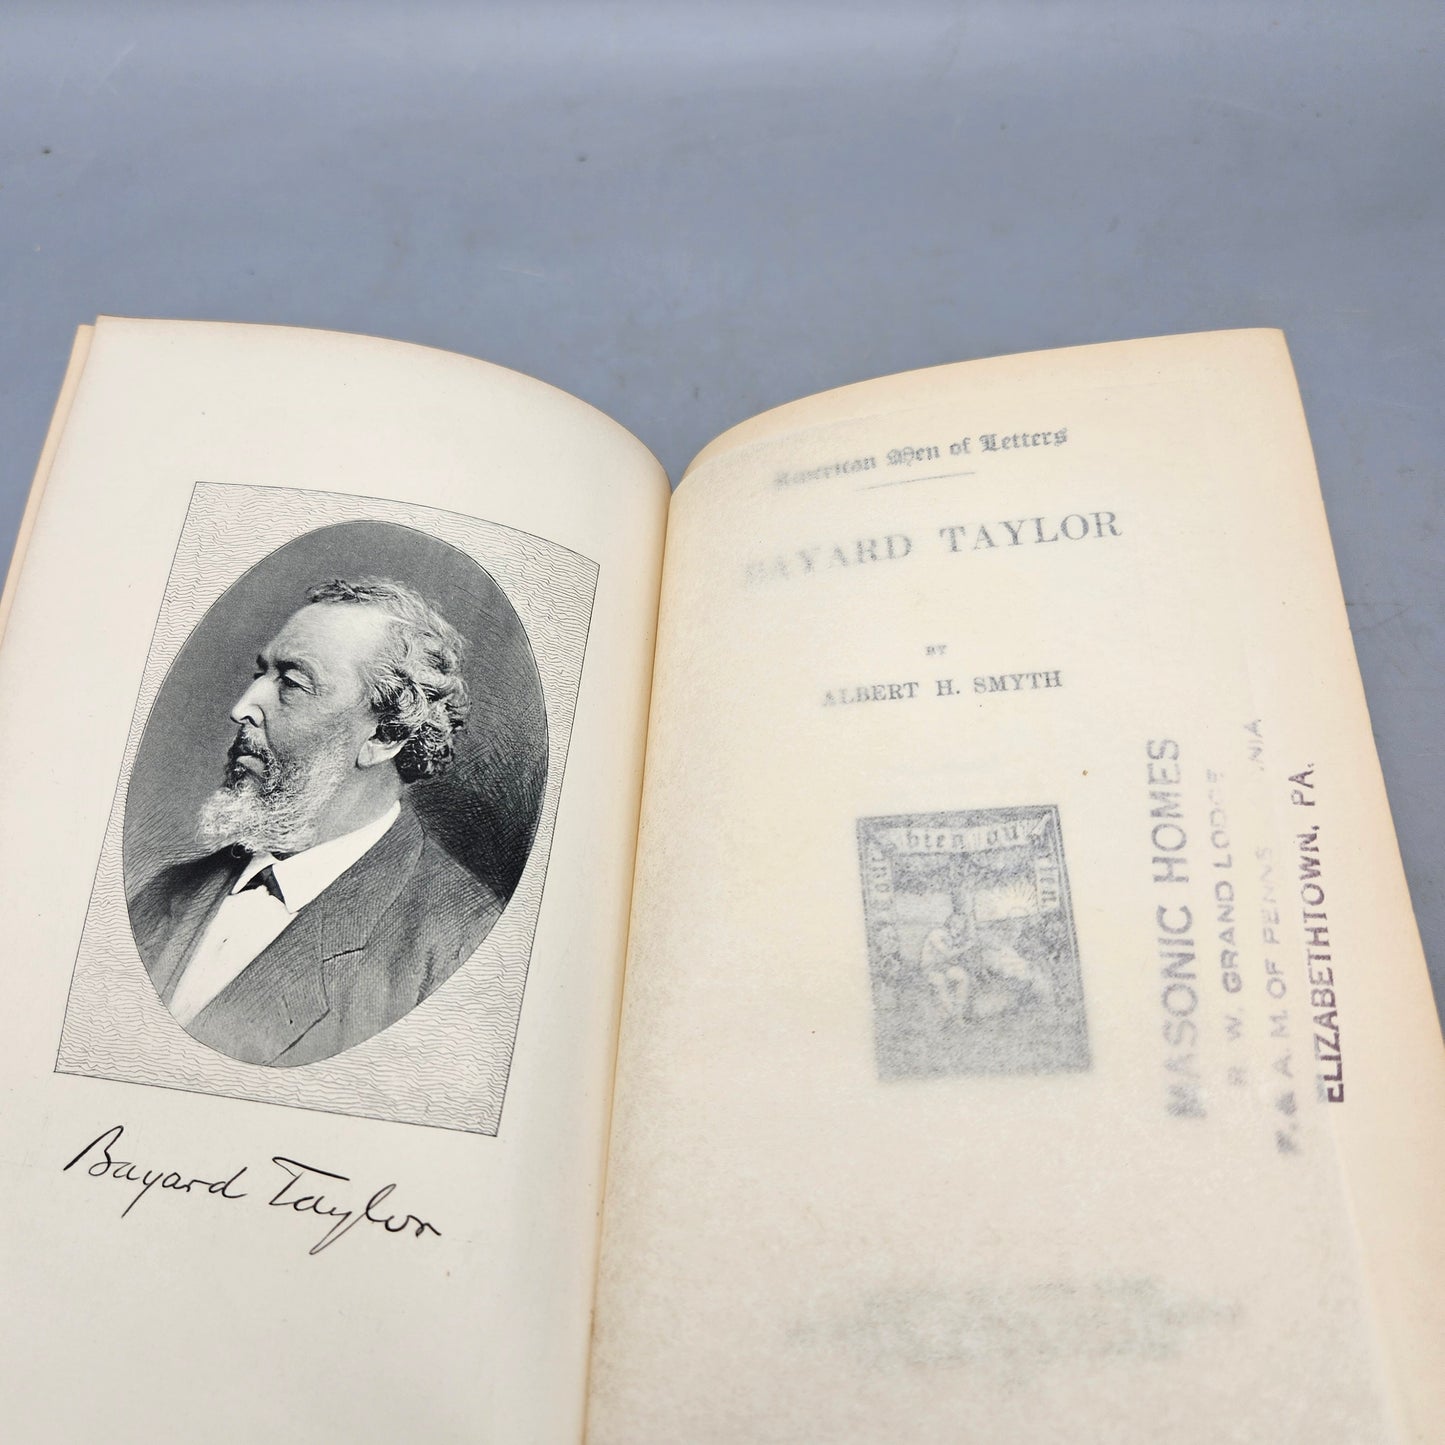 Book: American Men of Letters: Bayard Taylor. By Albert H. Smith. Houghton, Mifflin And Company, Boston, 1896